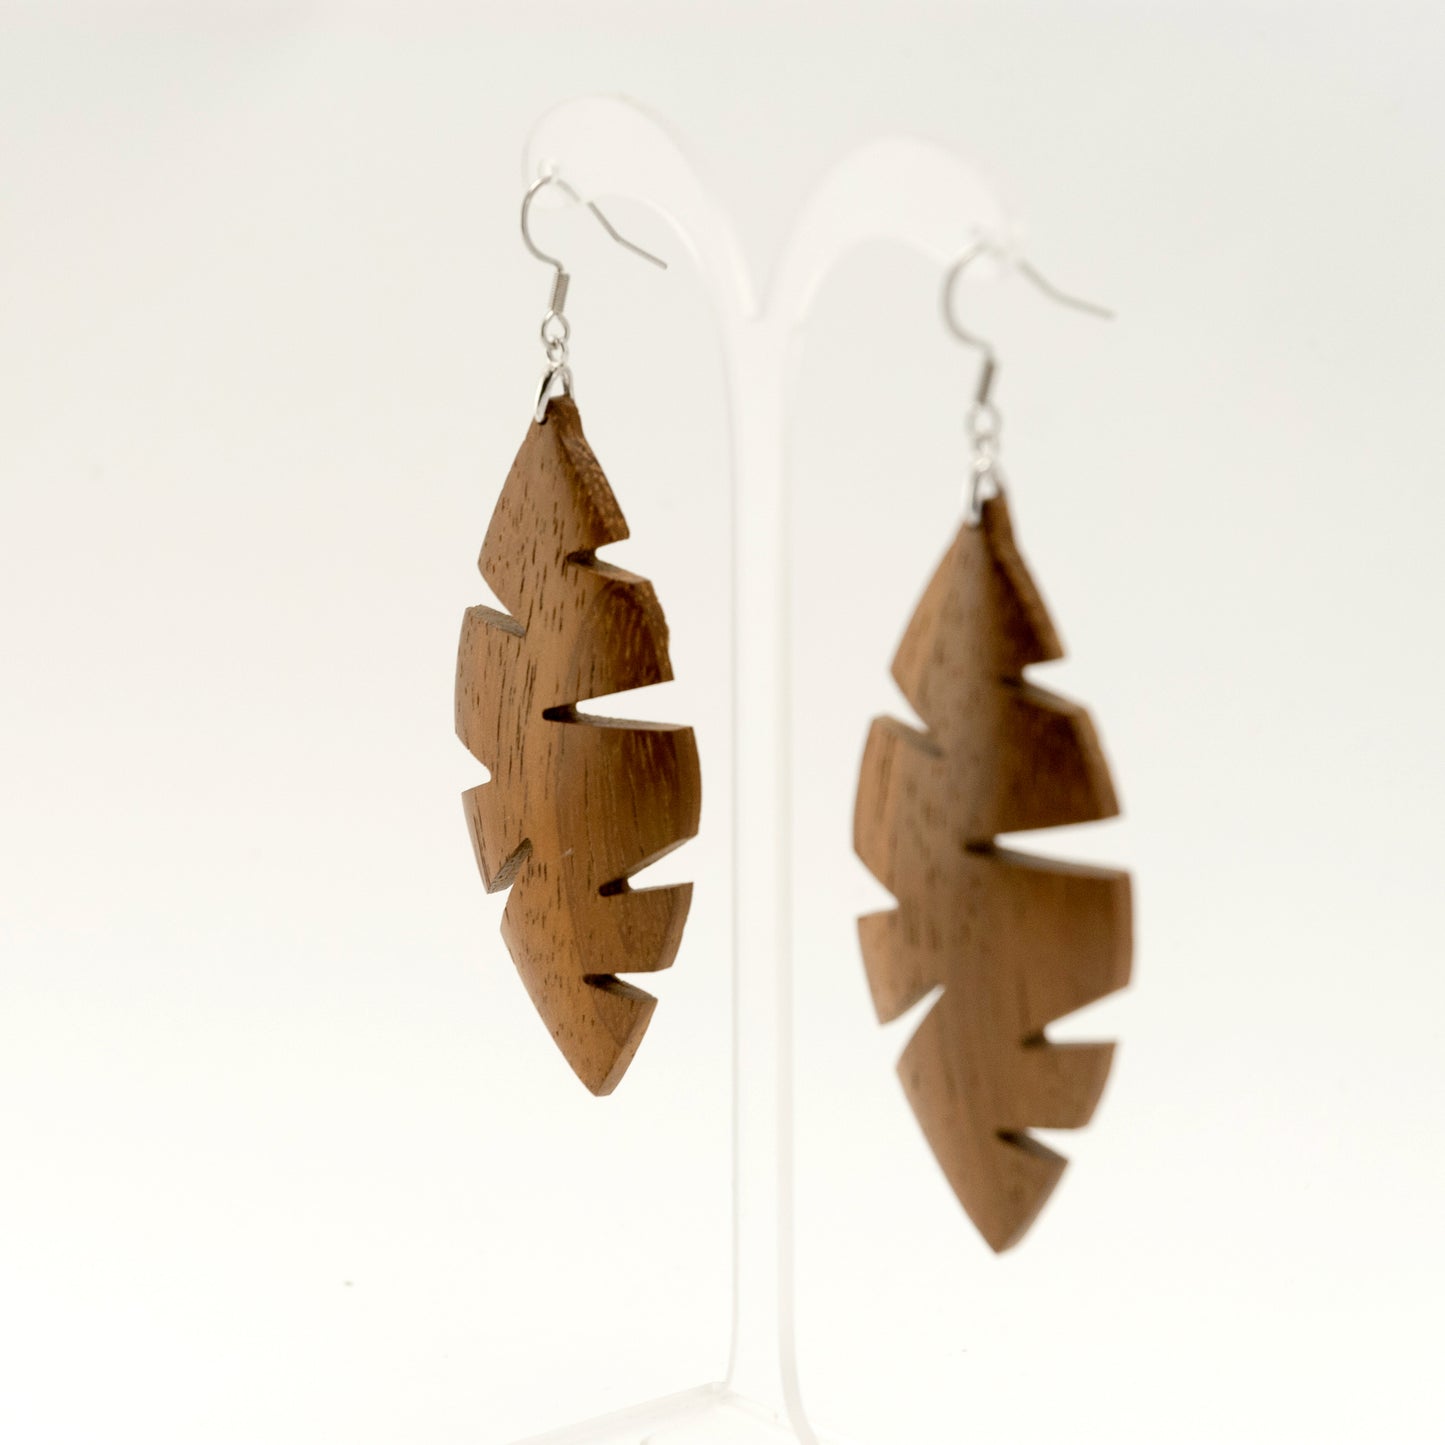 Hawaii. Iroko Leaf Wooden Earrings with Carved shape nature design A020-1